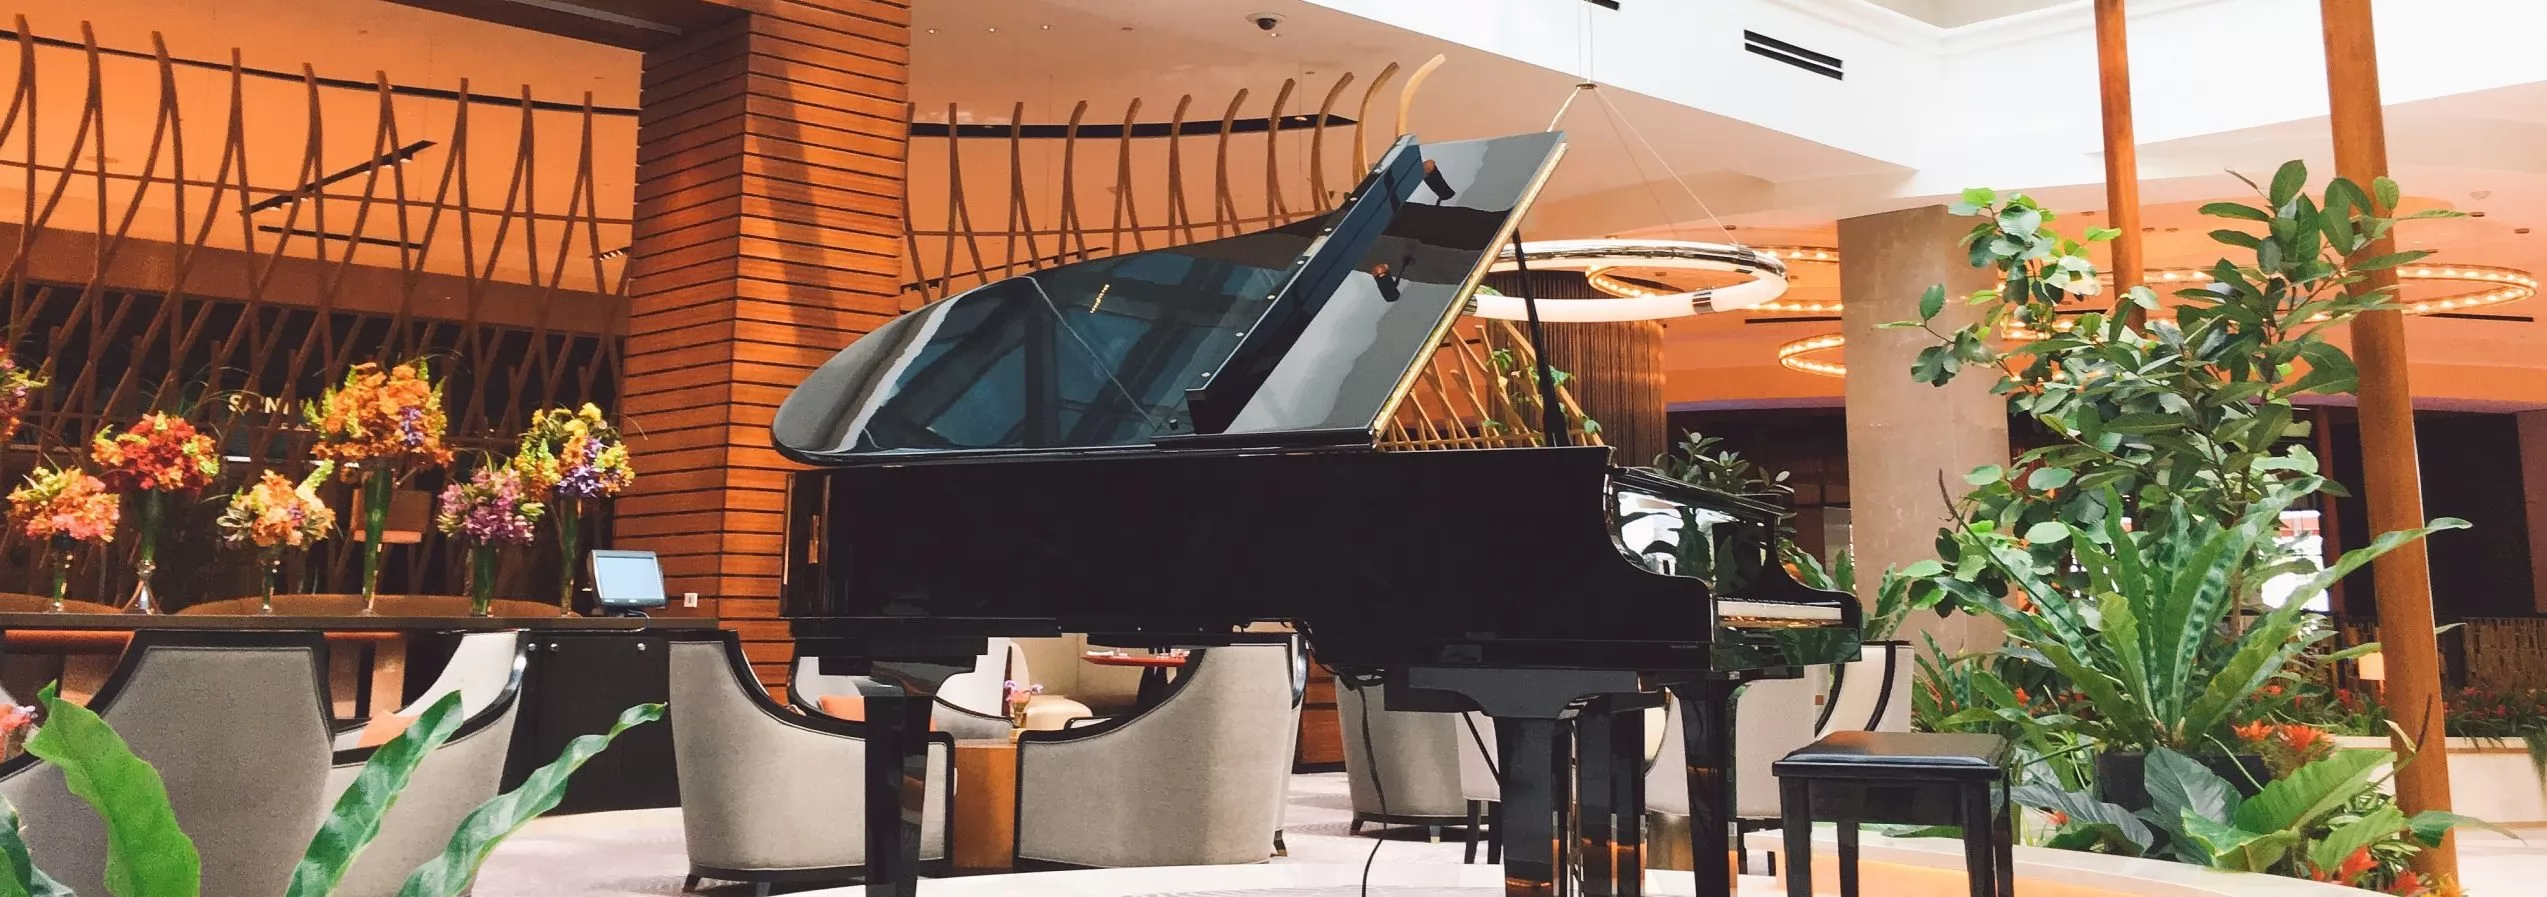 See the Top 3 most popular Concert Pianos among pianists